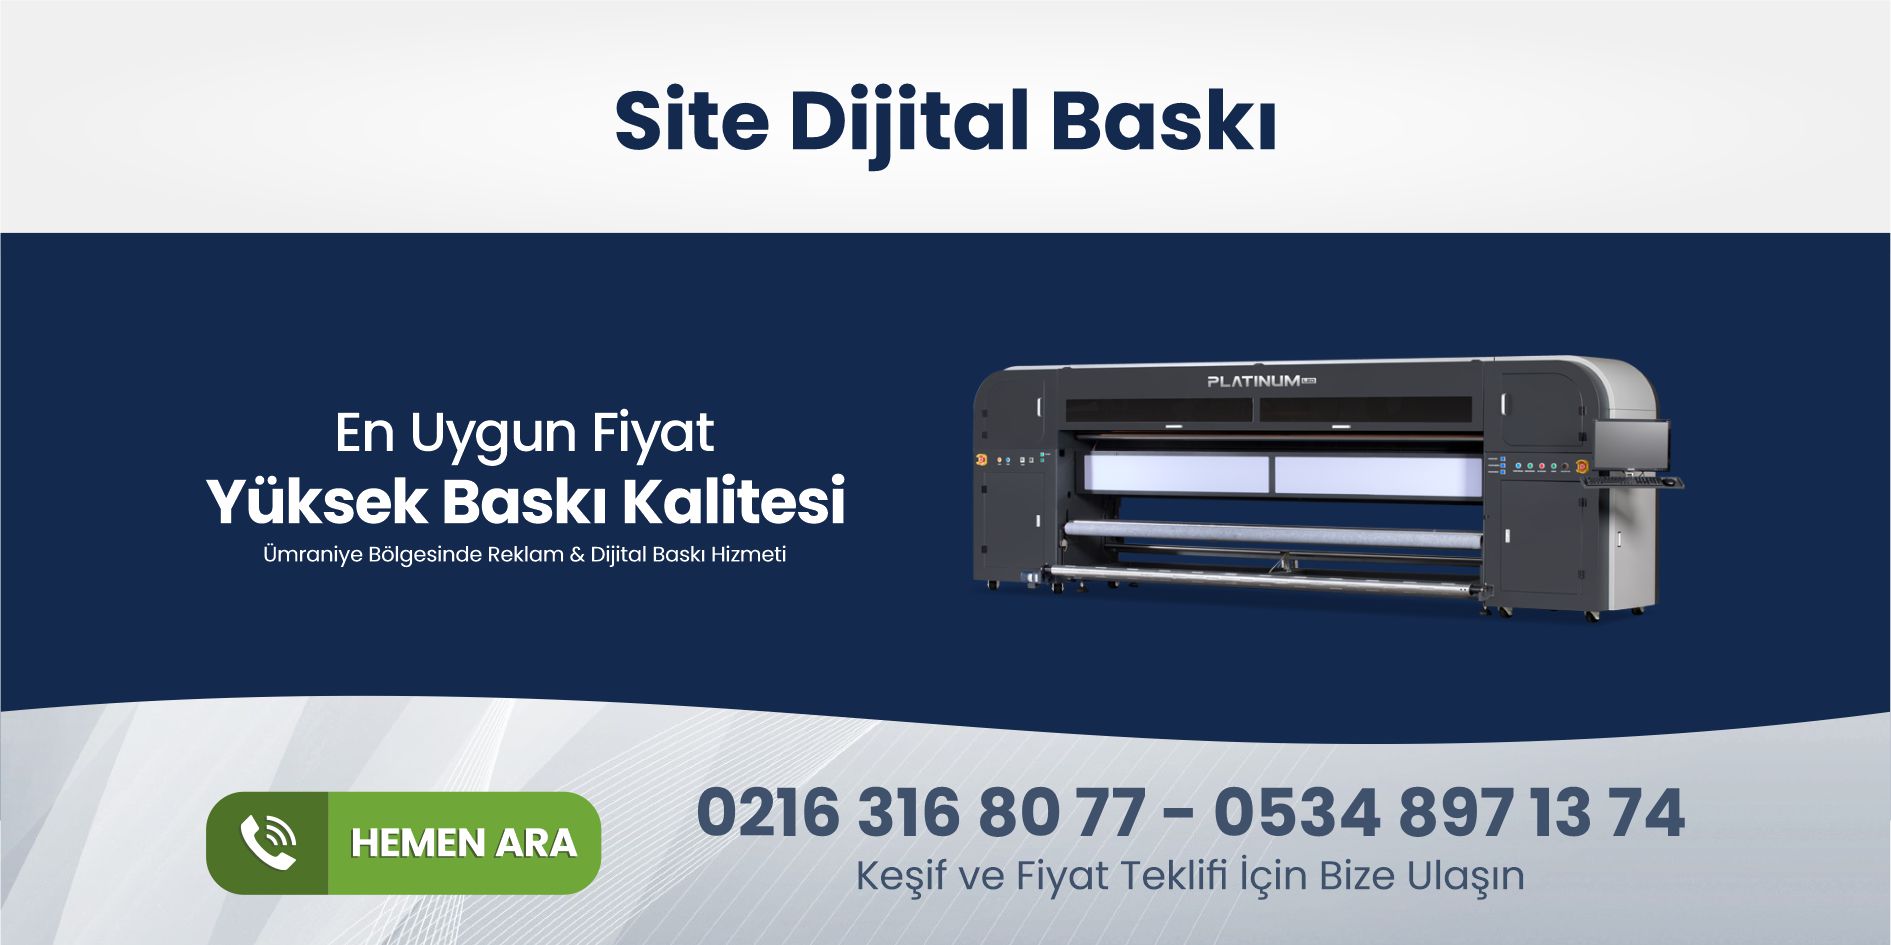 You are currently viewing Site Dijital Baskı